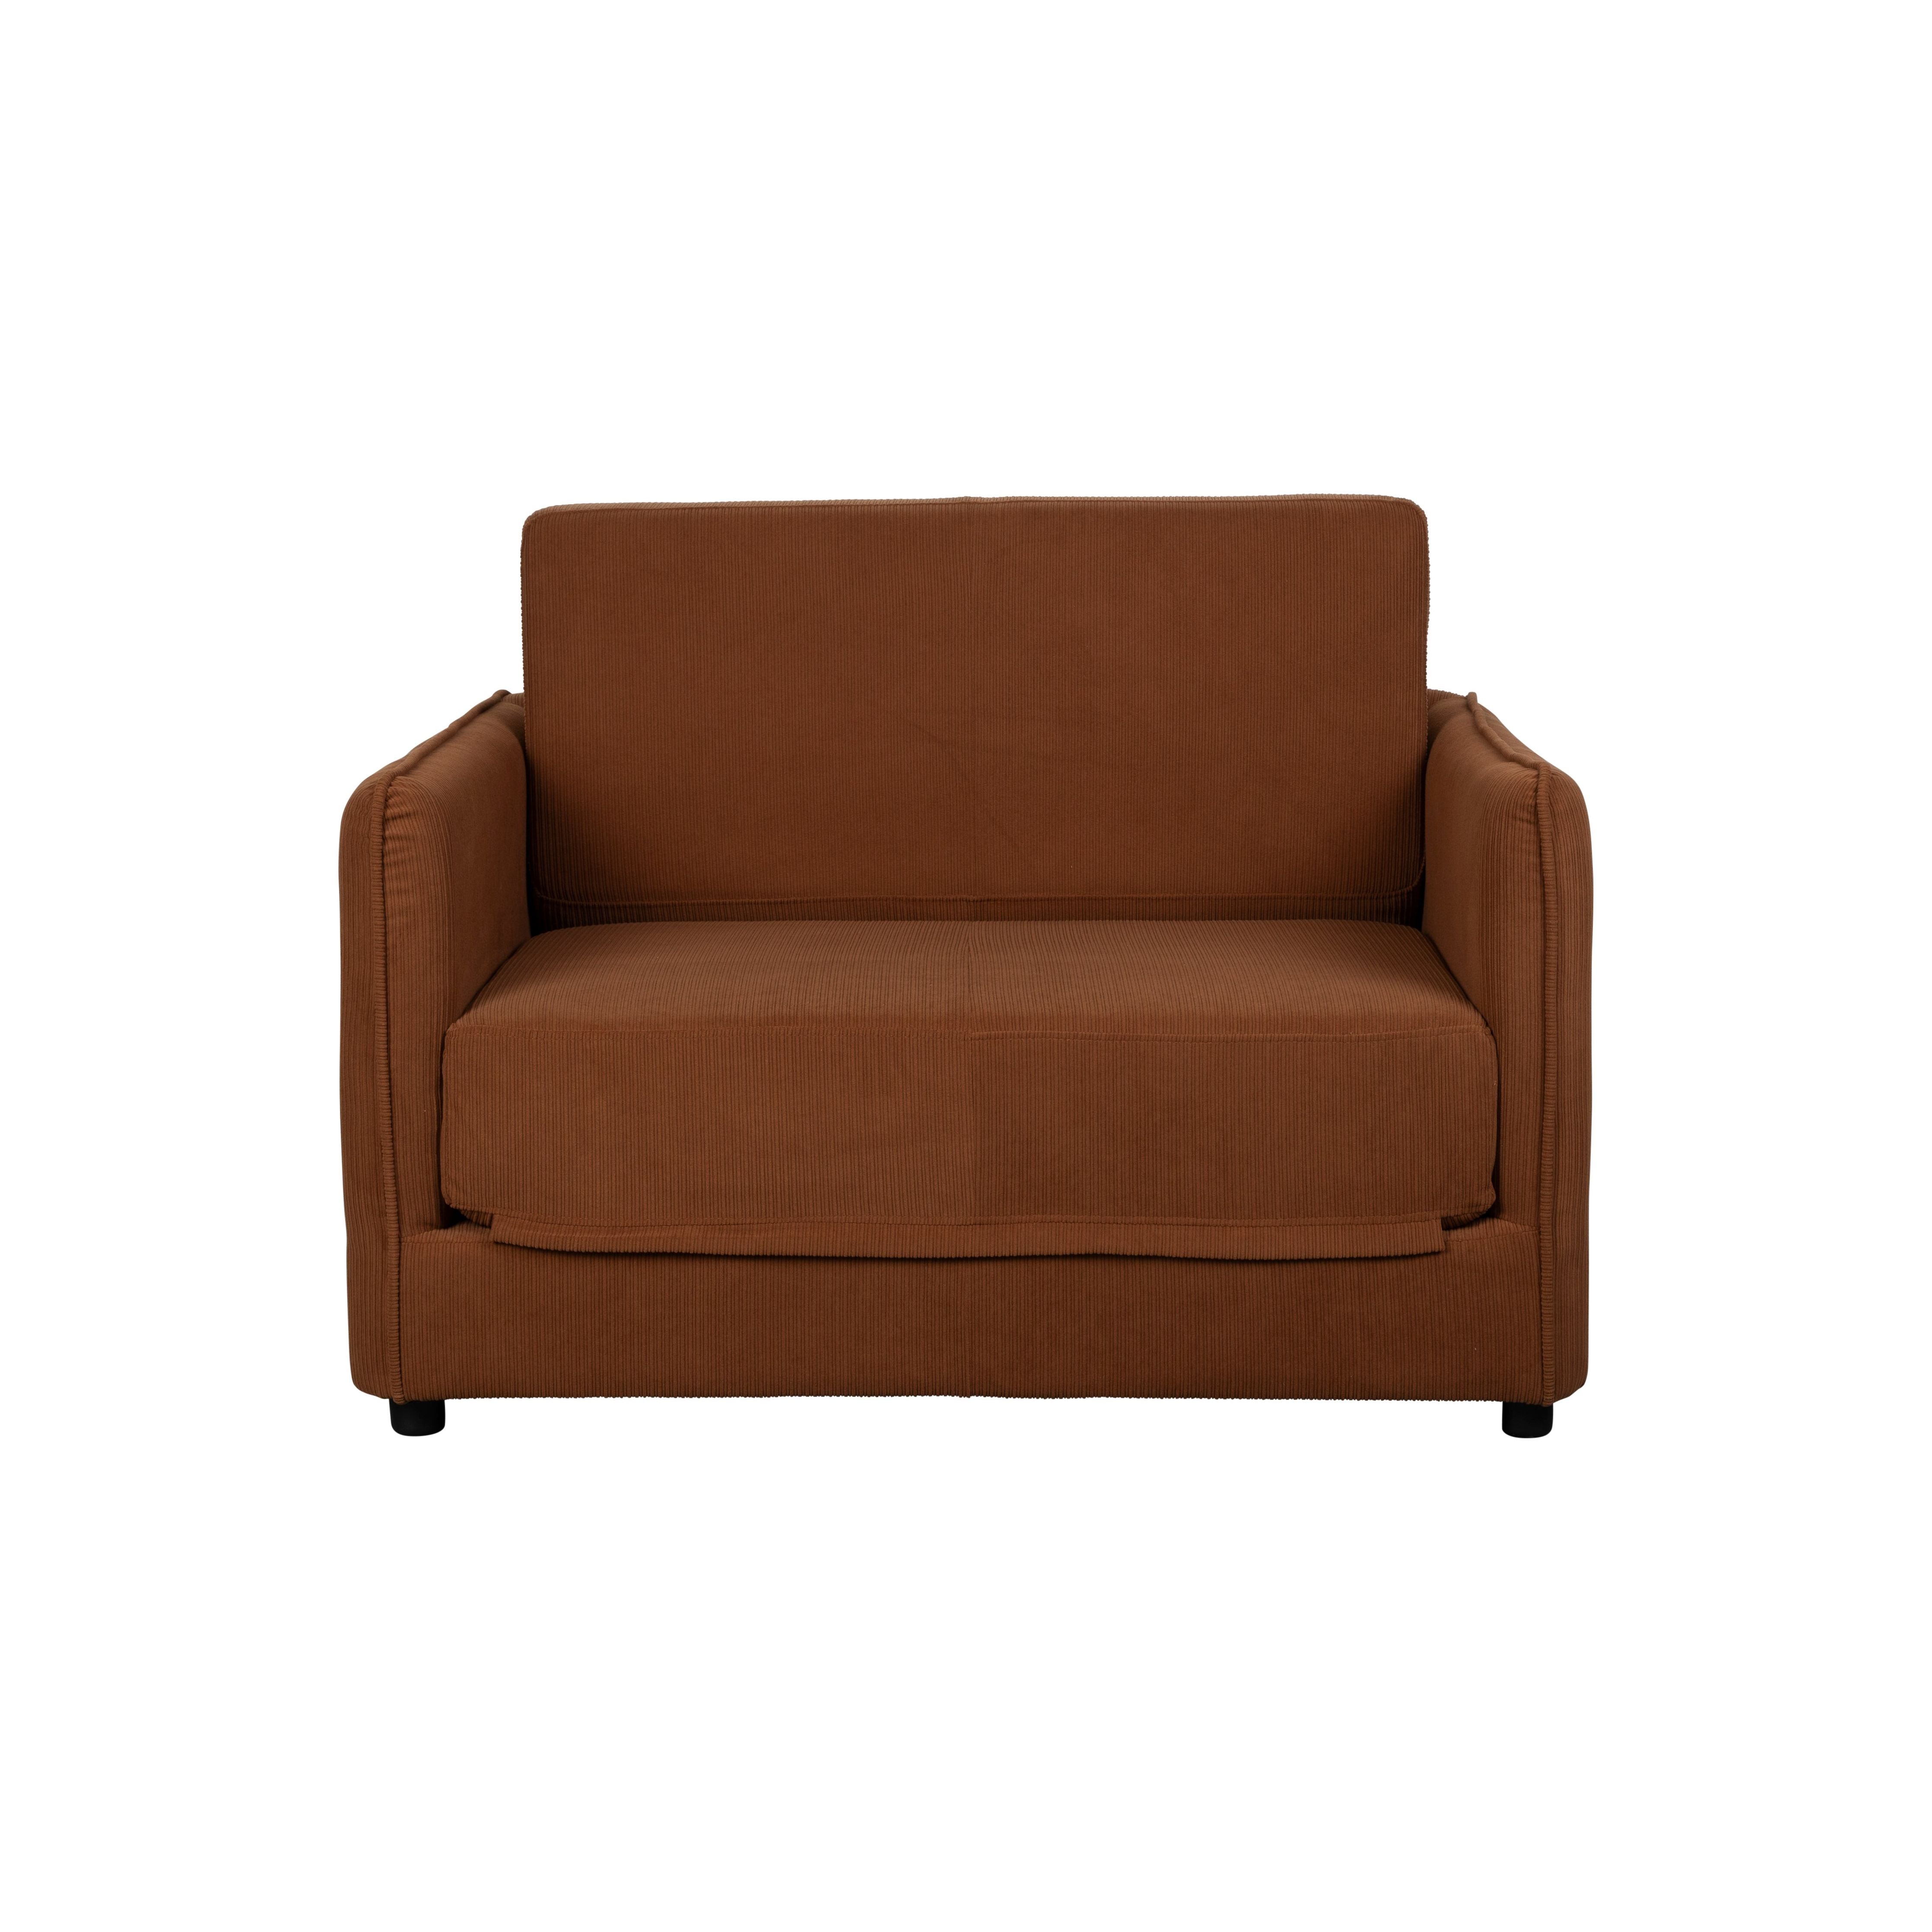 Love seat  sofabed jopie brown